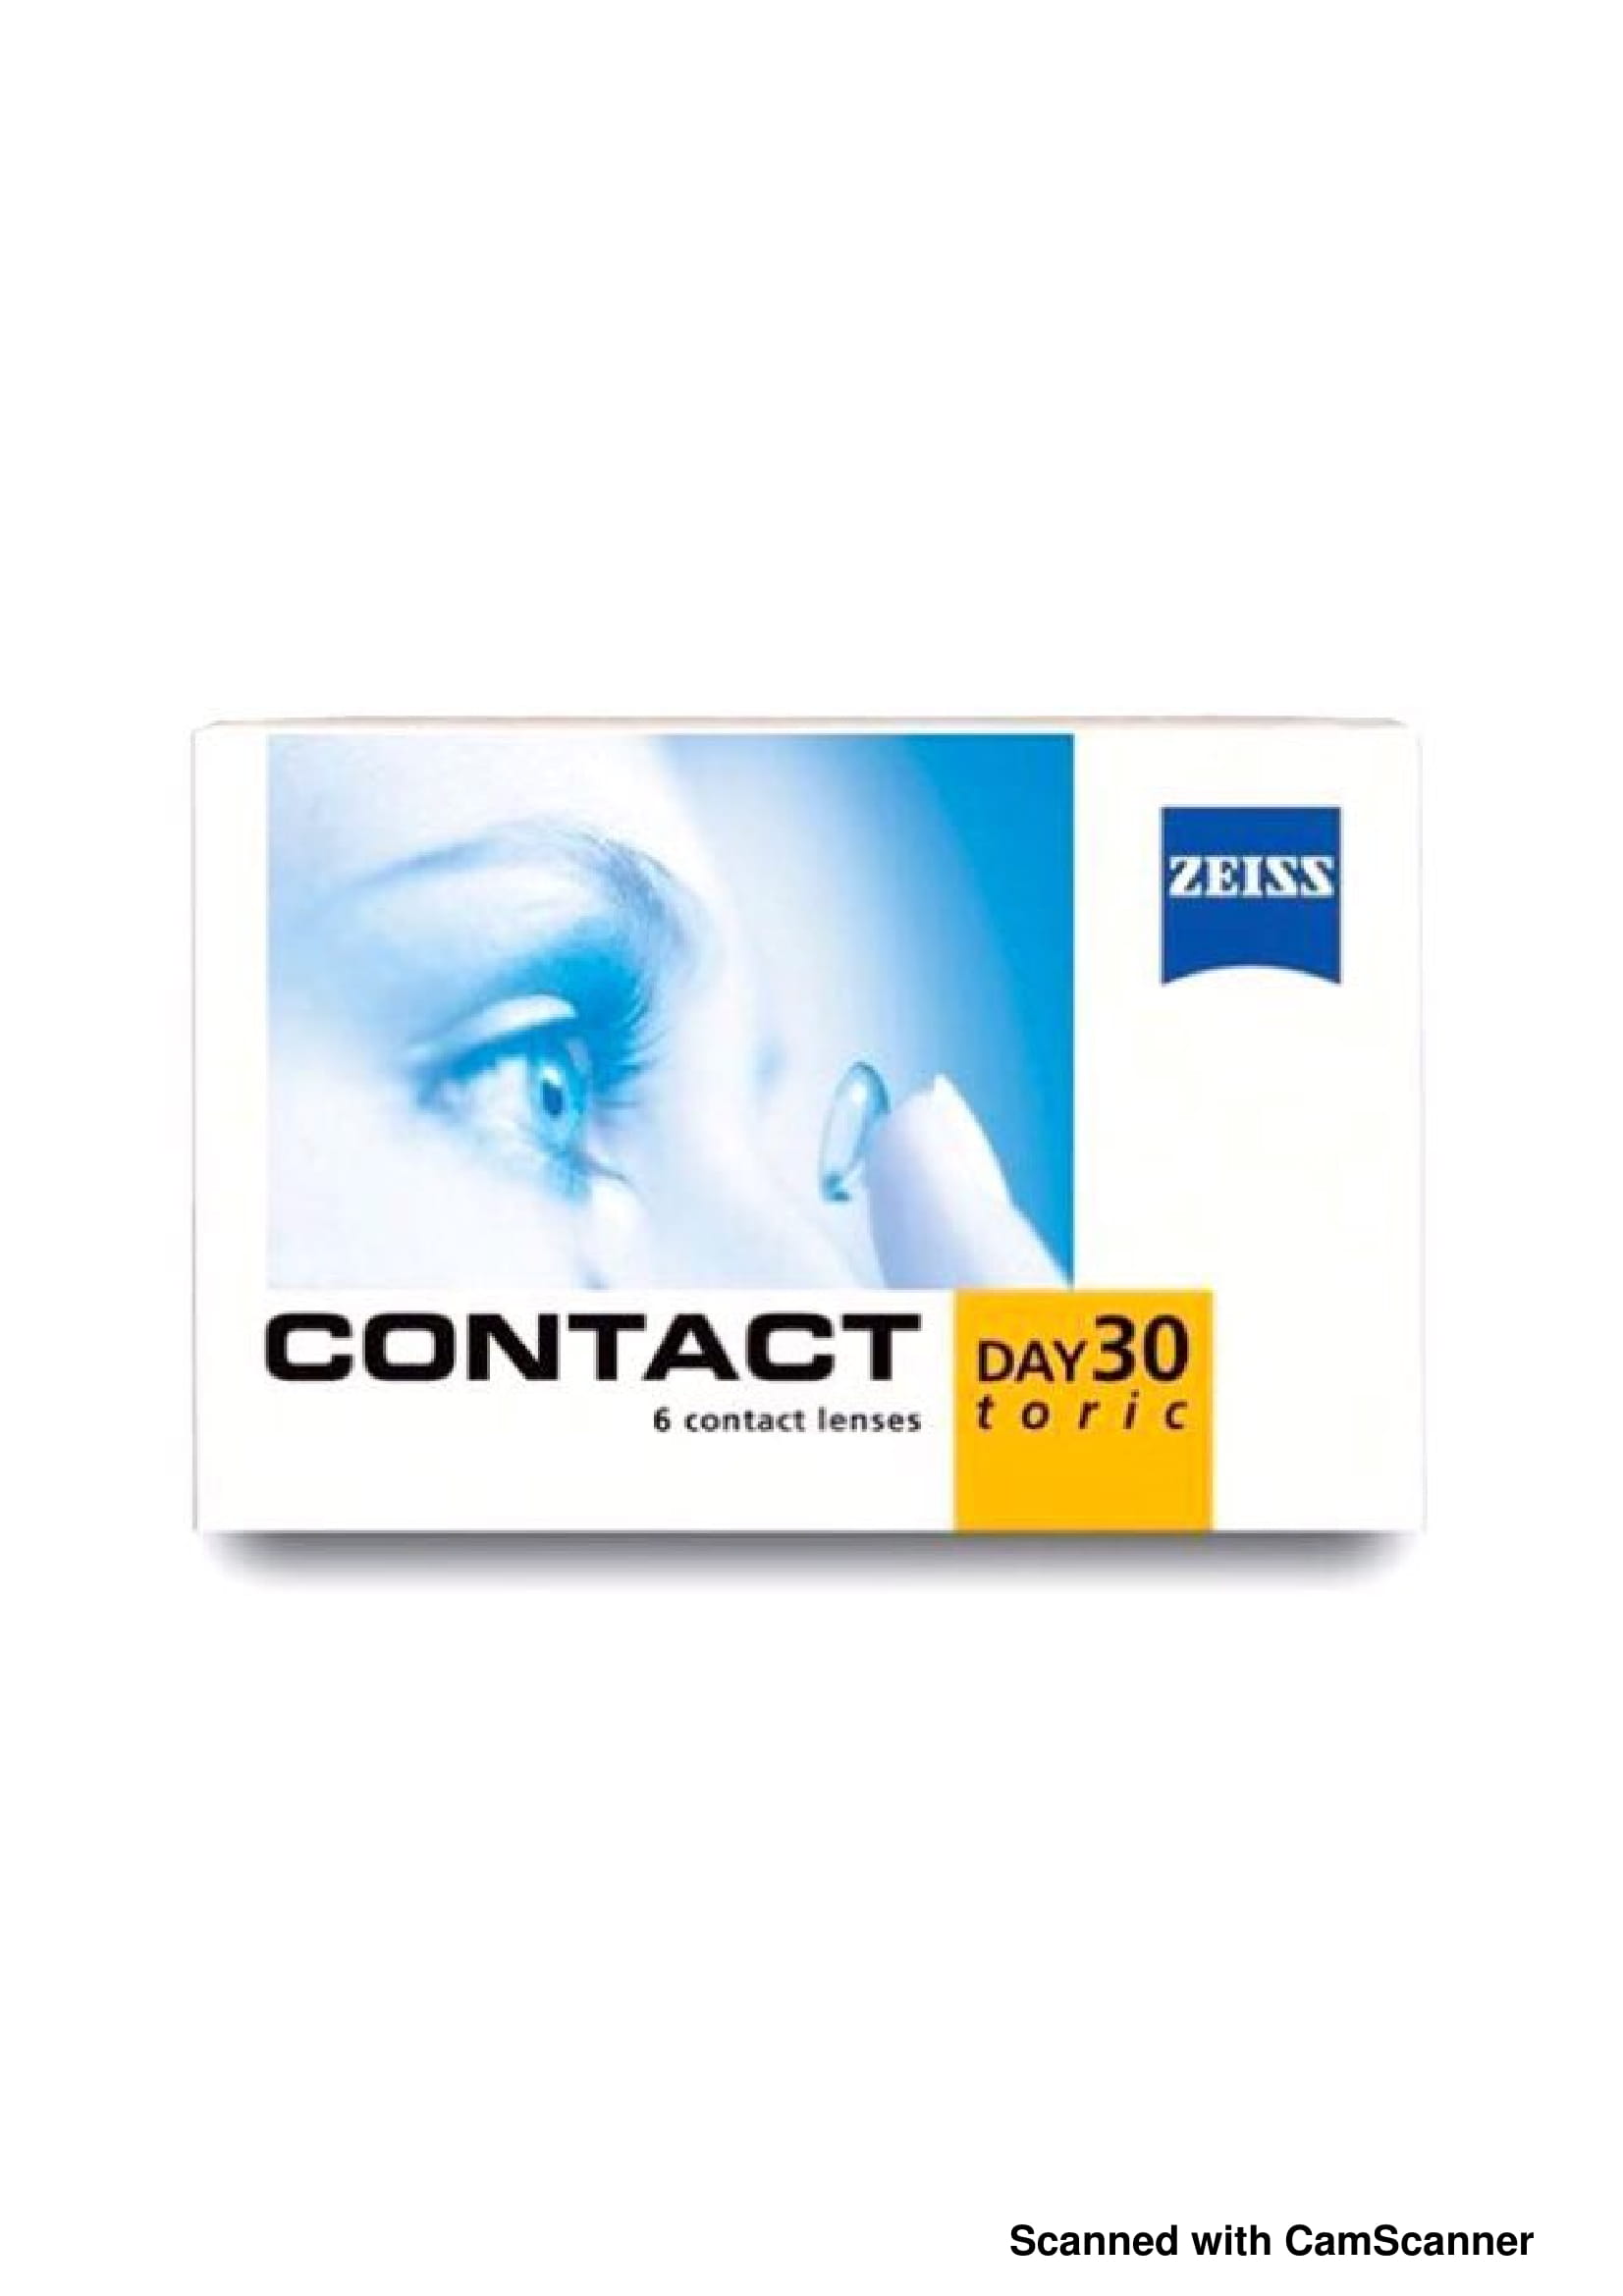 Day we contact. Дни Zeiss. Zeiss contact Day 30 Compatic Toric.